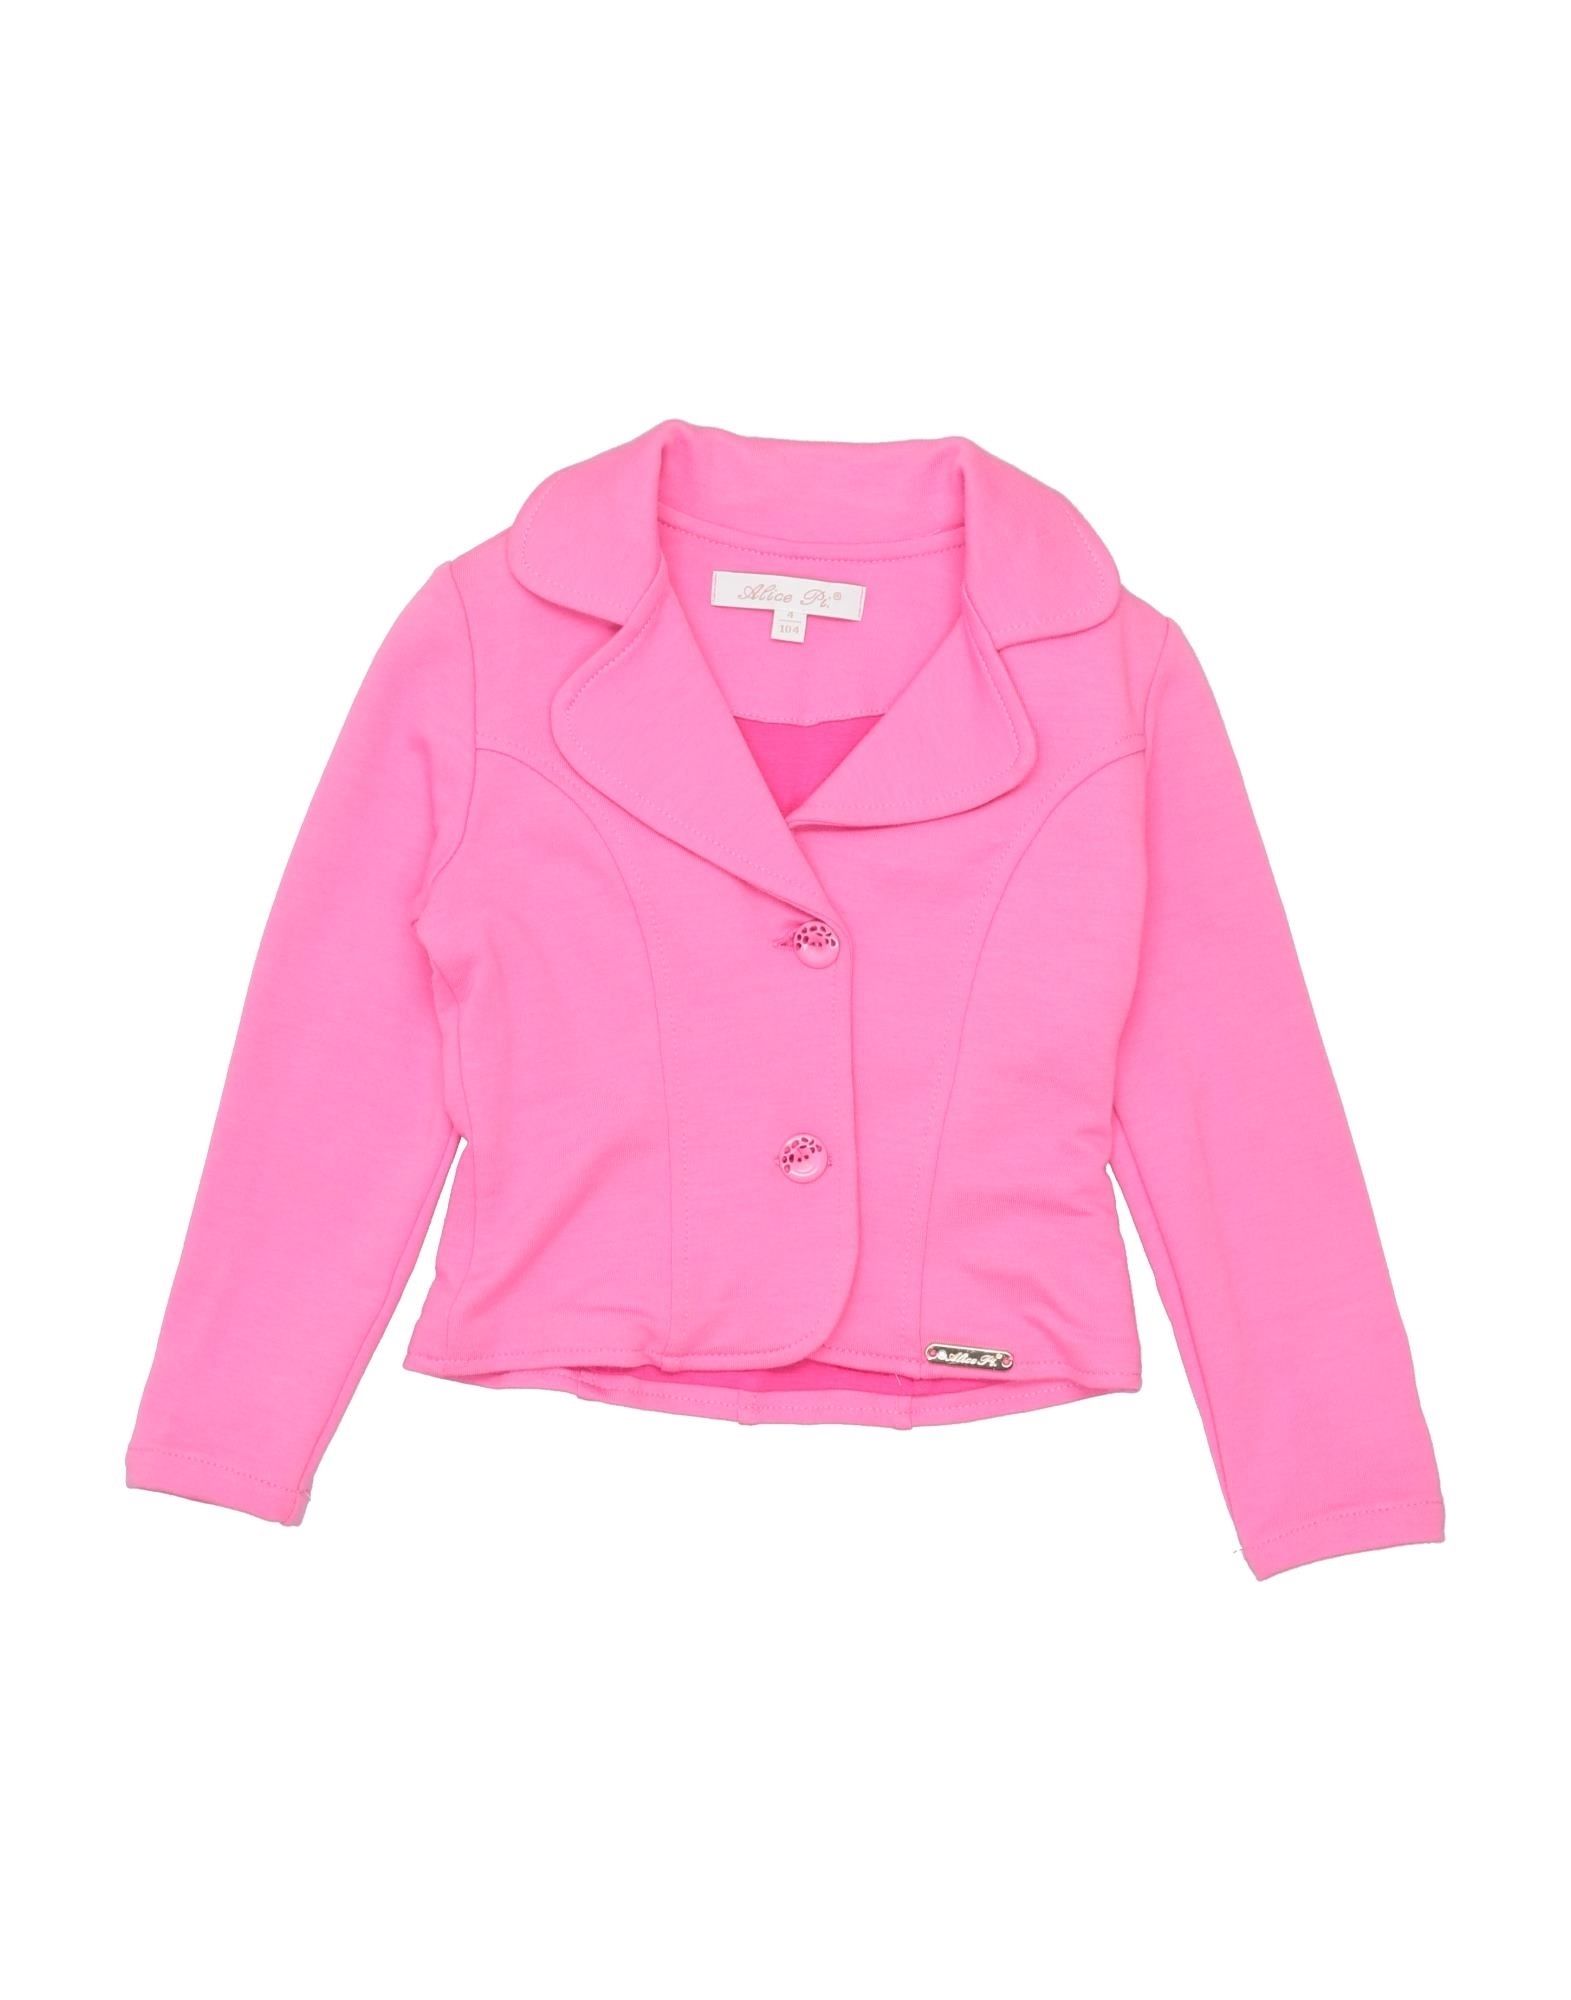 Alice Pi. Kids' Suit Jackets In Pink